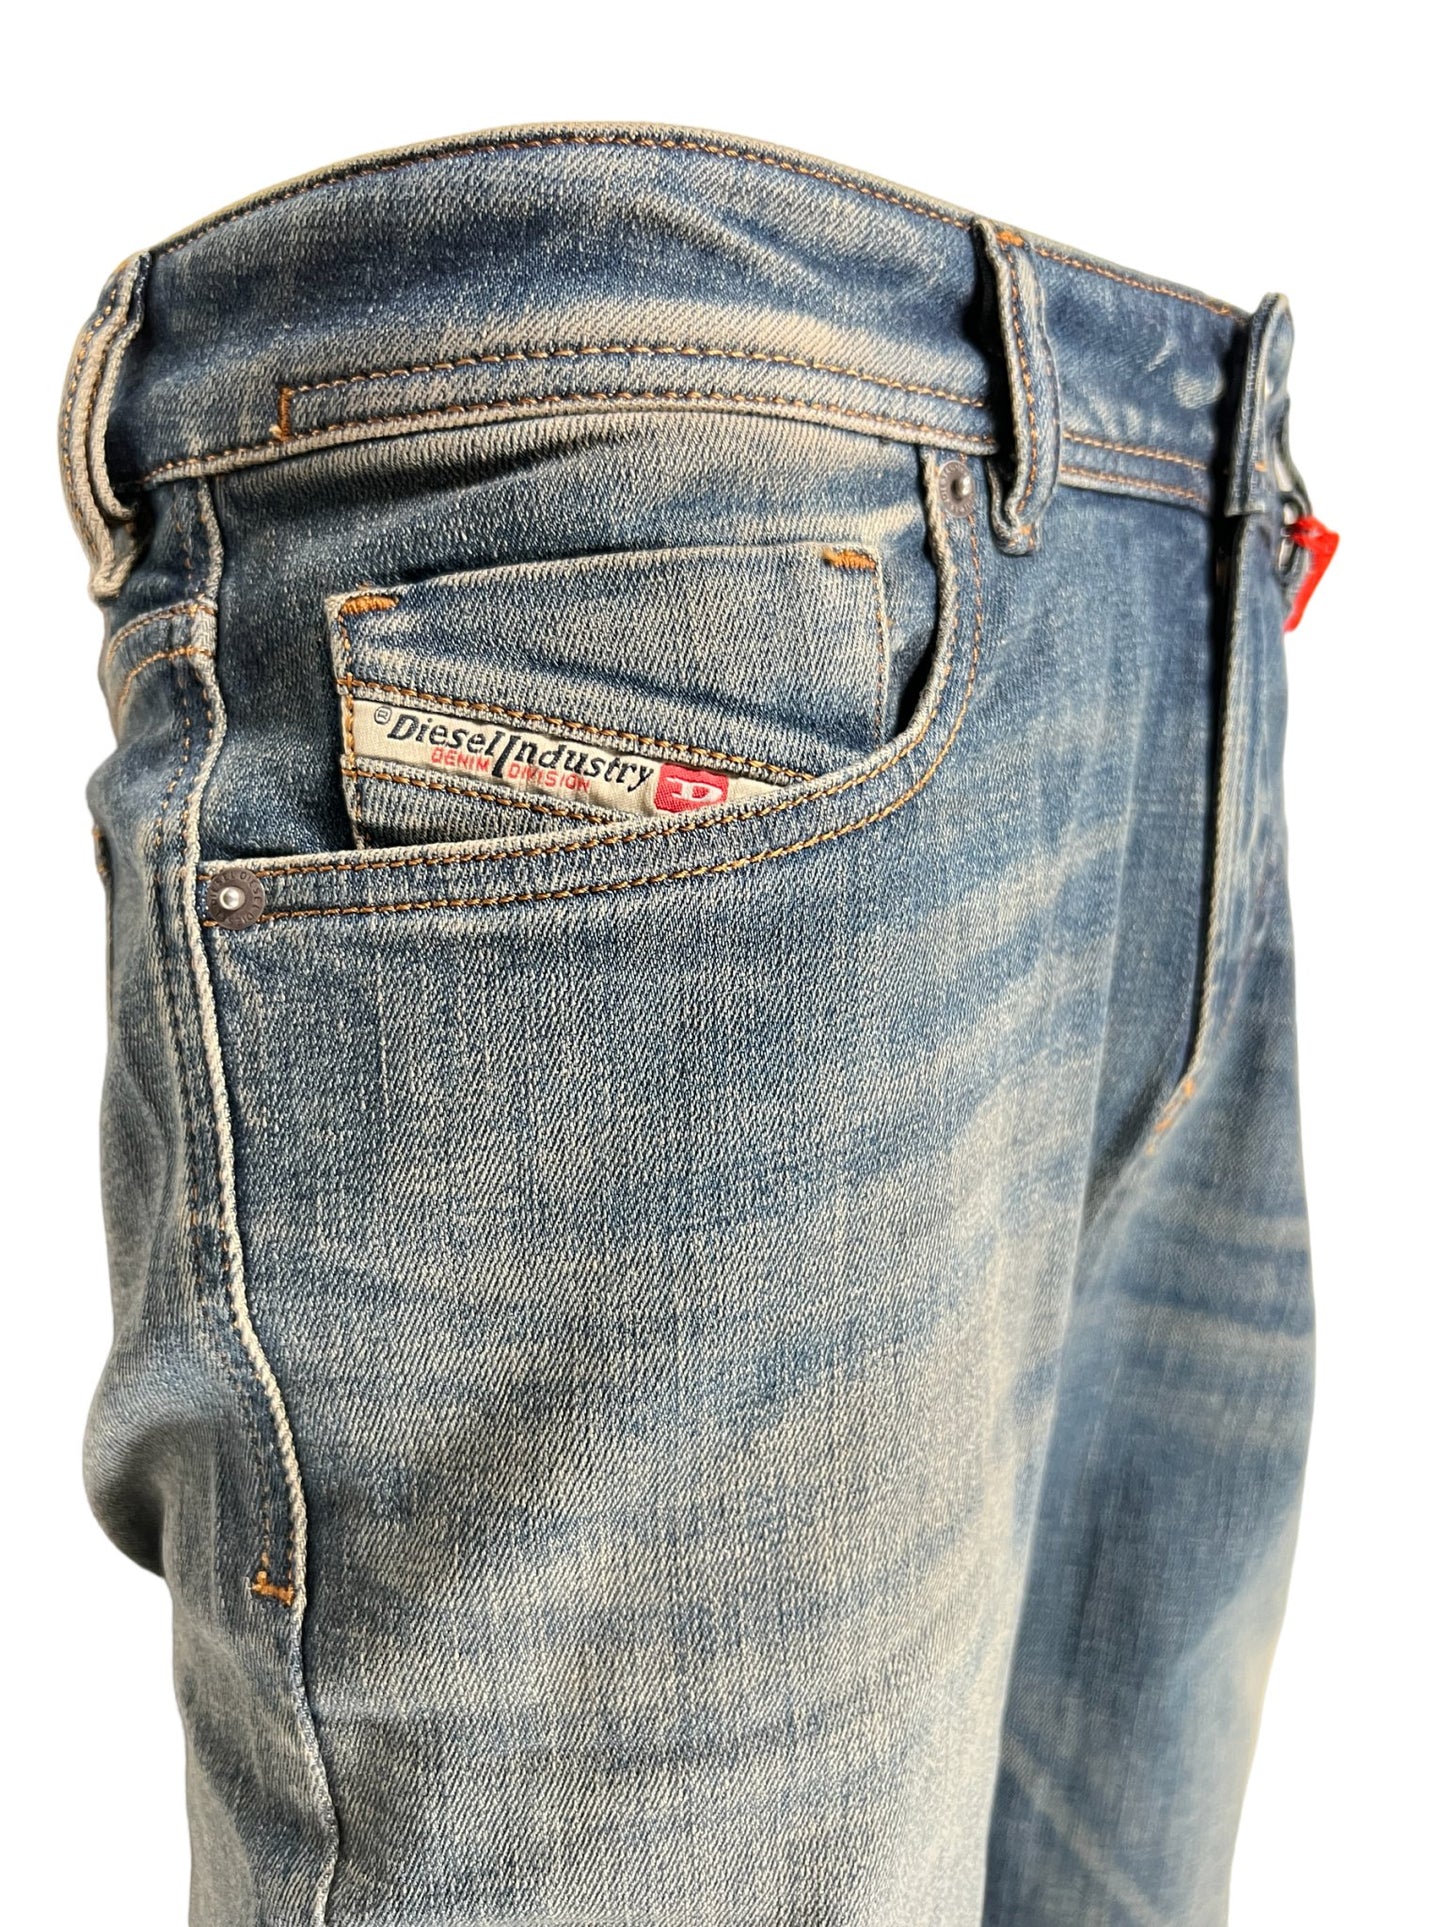 A pair of DIESEL 1979 SLEENKER 9H69 DENIM skinny style jeans with a pocket in the back.